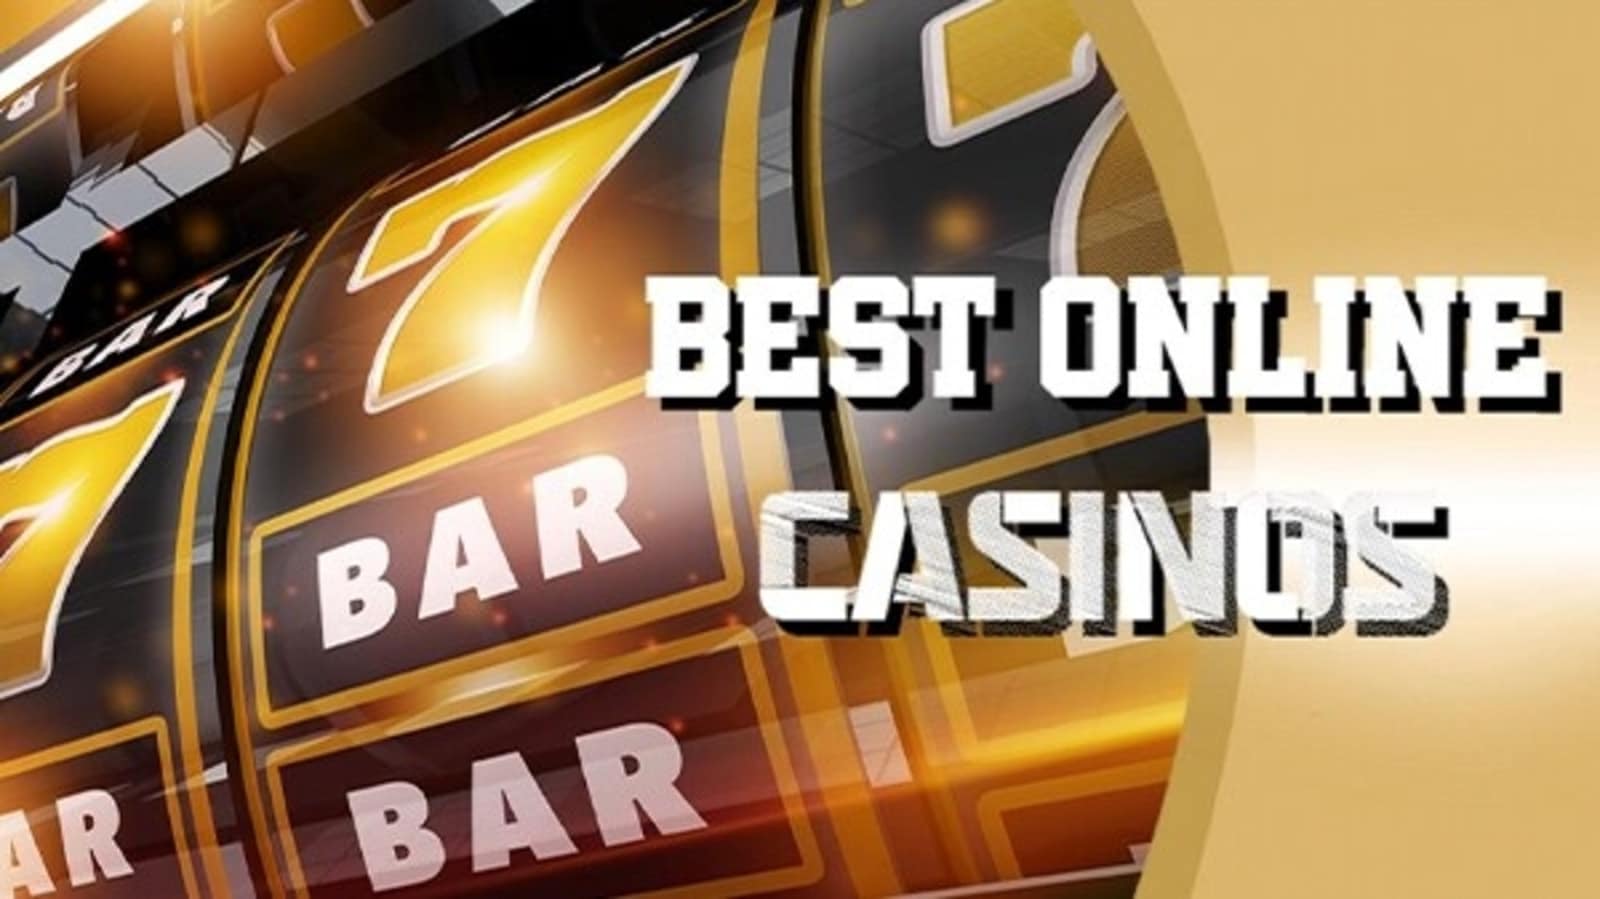 new aussie casino sites Once, new aussie casino sites Twice: 3 Reasons Why You Shouldn't new aussie casino sites The Third Time